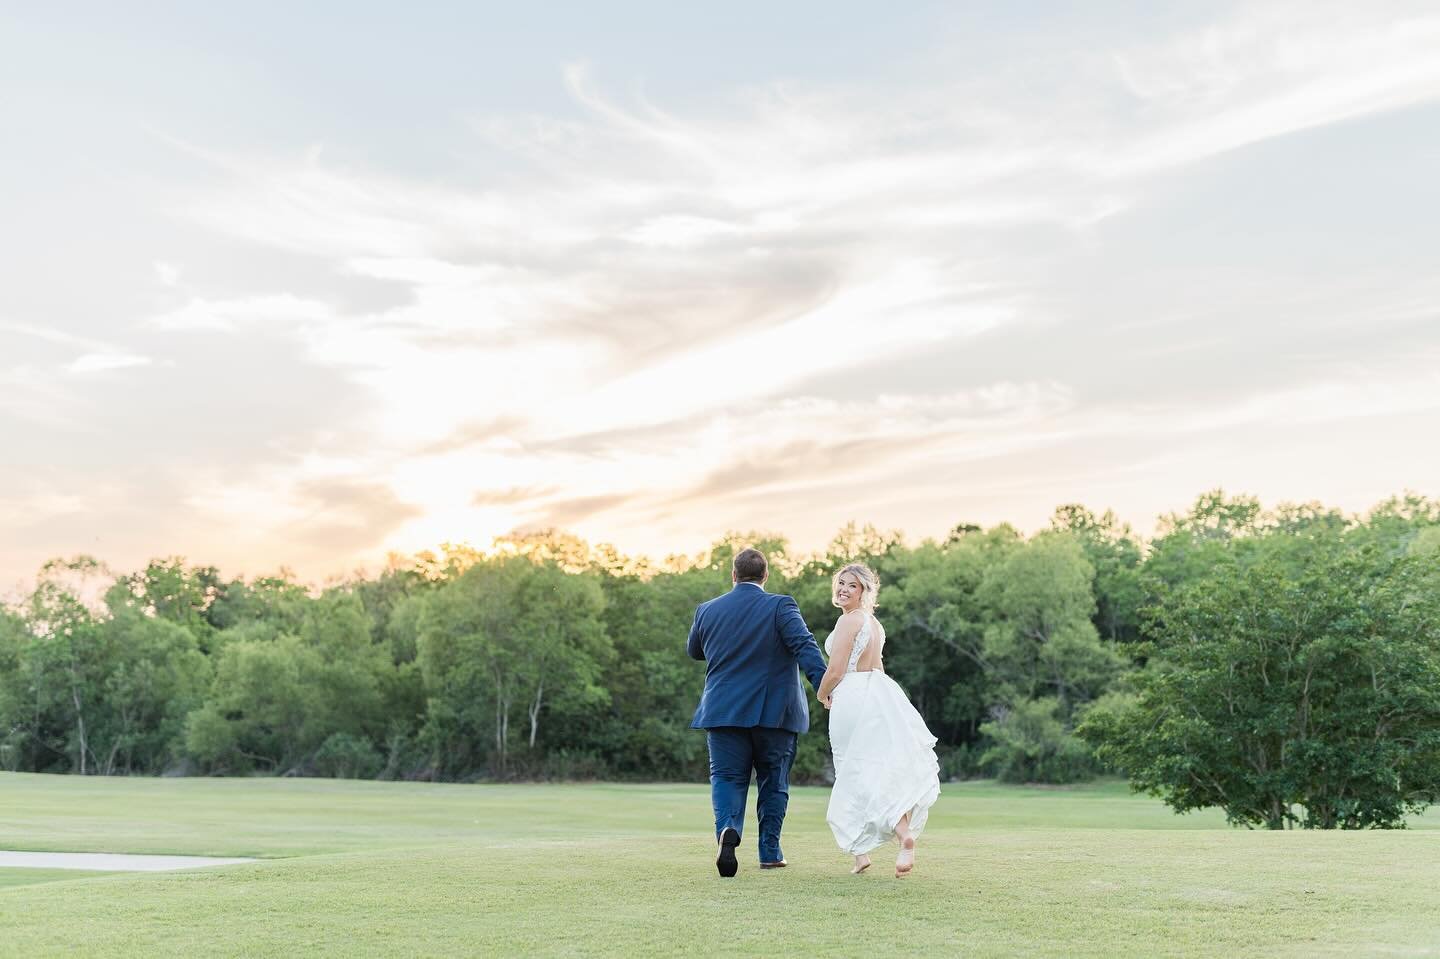 A favorite from Saturday! Mallory and Brance got married this weekend at @veranda_at_preserve and it was beautiful 

#verandaatthepreserve #alabamaweddings #alabamaweddingphotographer #alabamaweddingplanner #mobilealabamaweddingphotographer #gulfcoas